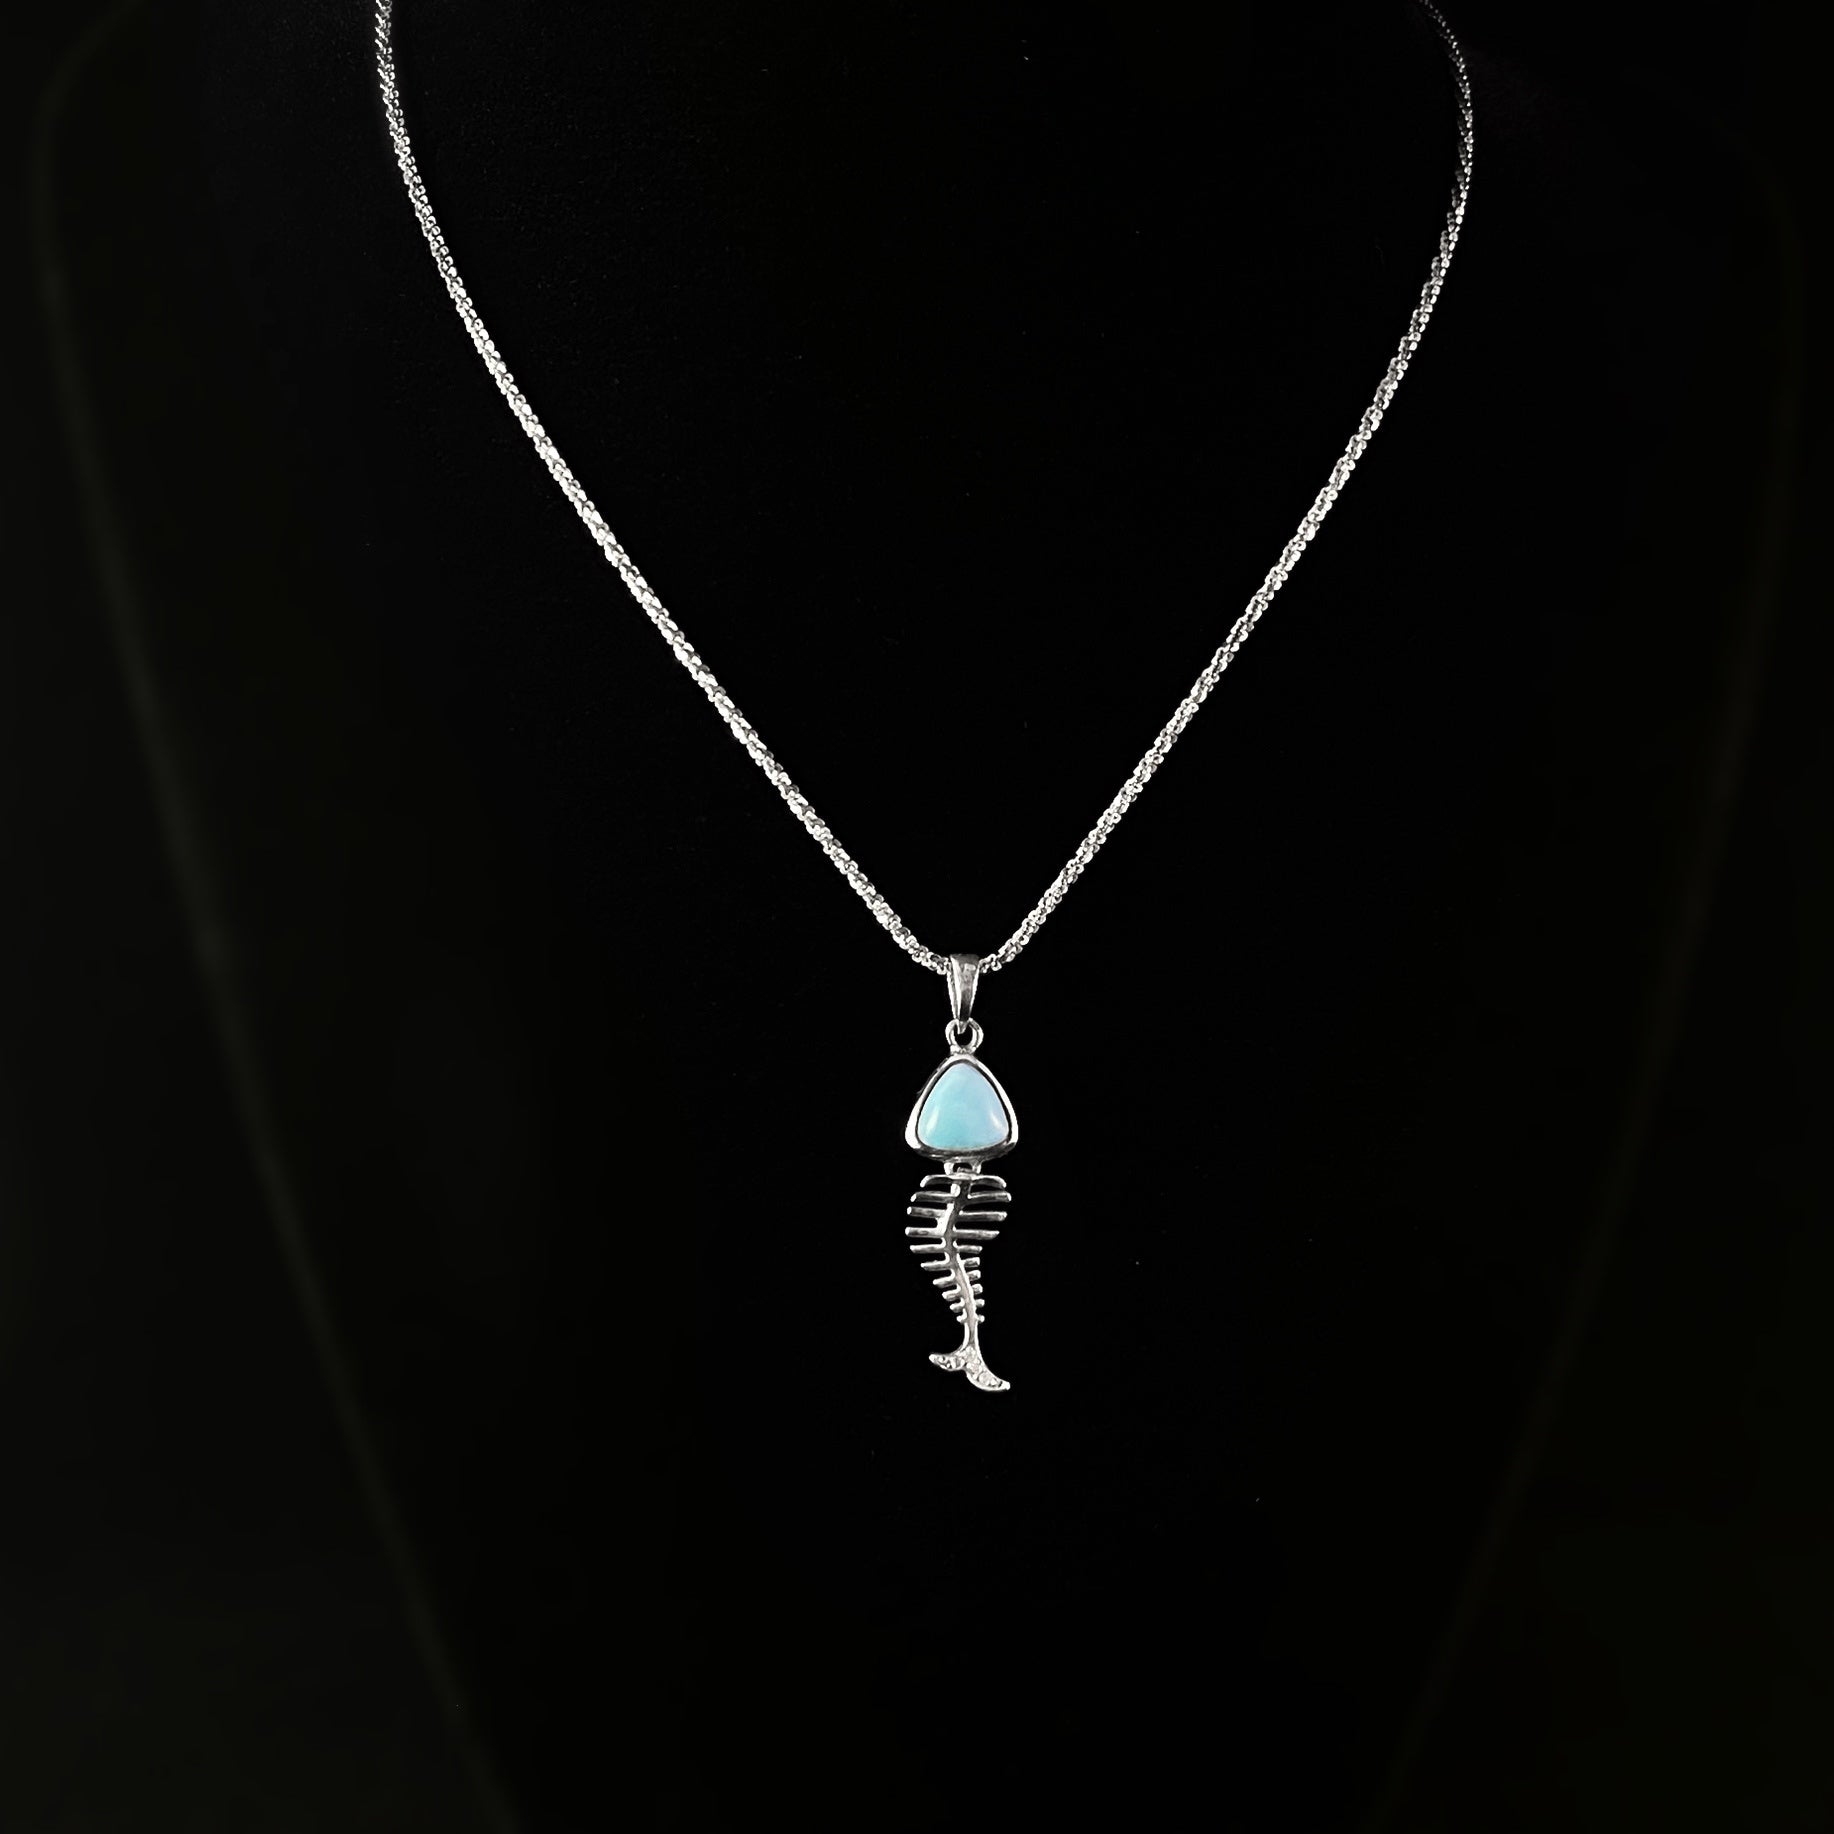 Marahlago Larimar and Sterling Silver Fishbone Necklace